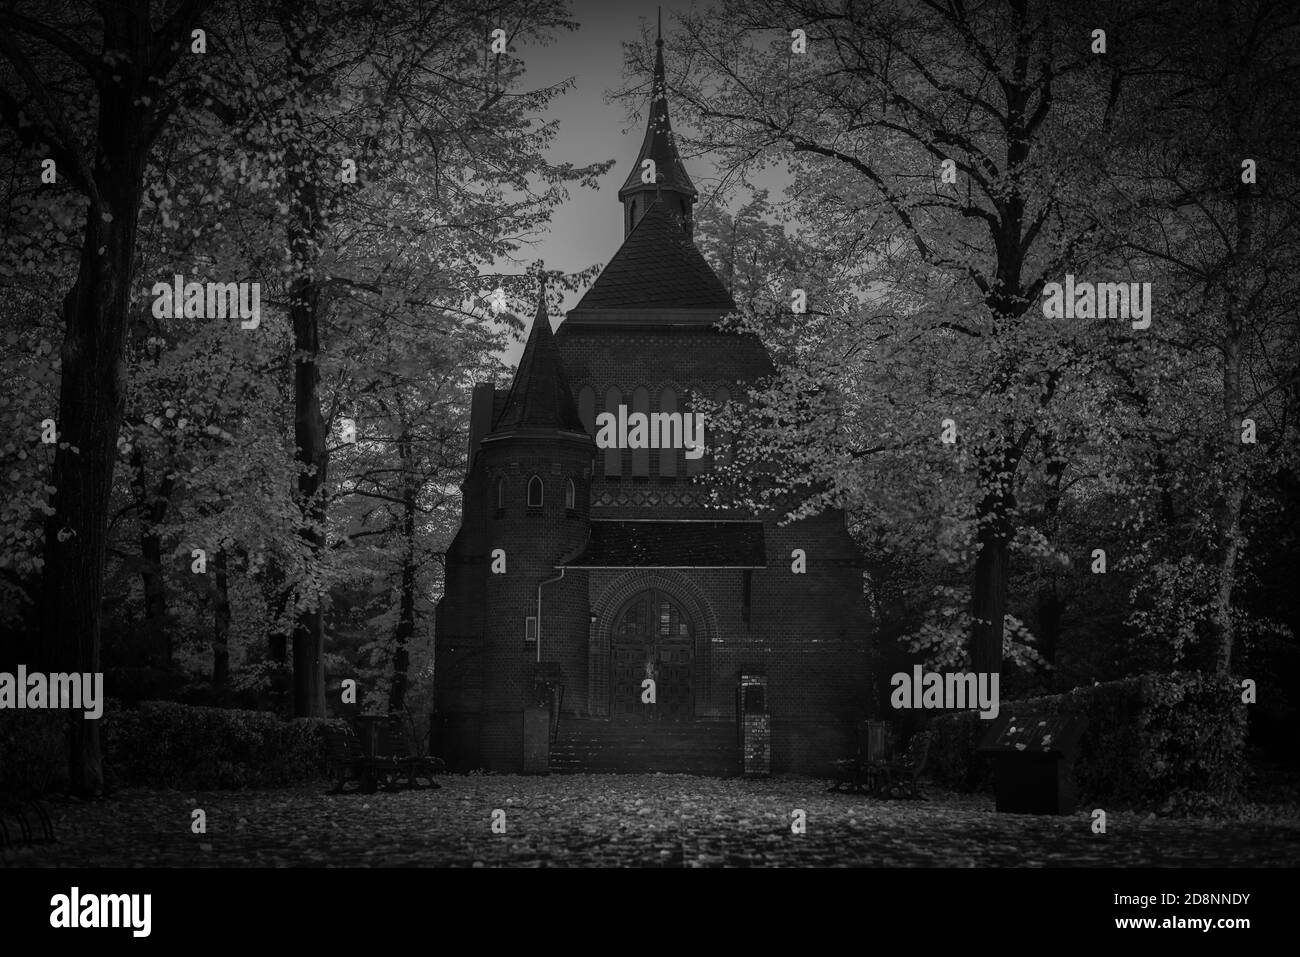 cemetery chapel at Night, chapel, trees, Sepia Photo, Black and White, spooky Chapel on a Cemetry at night, autumn time, dark photo Stock Photo